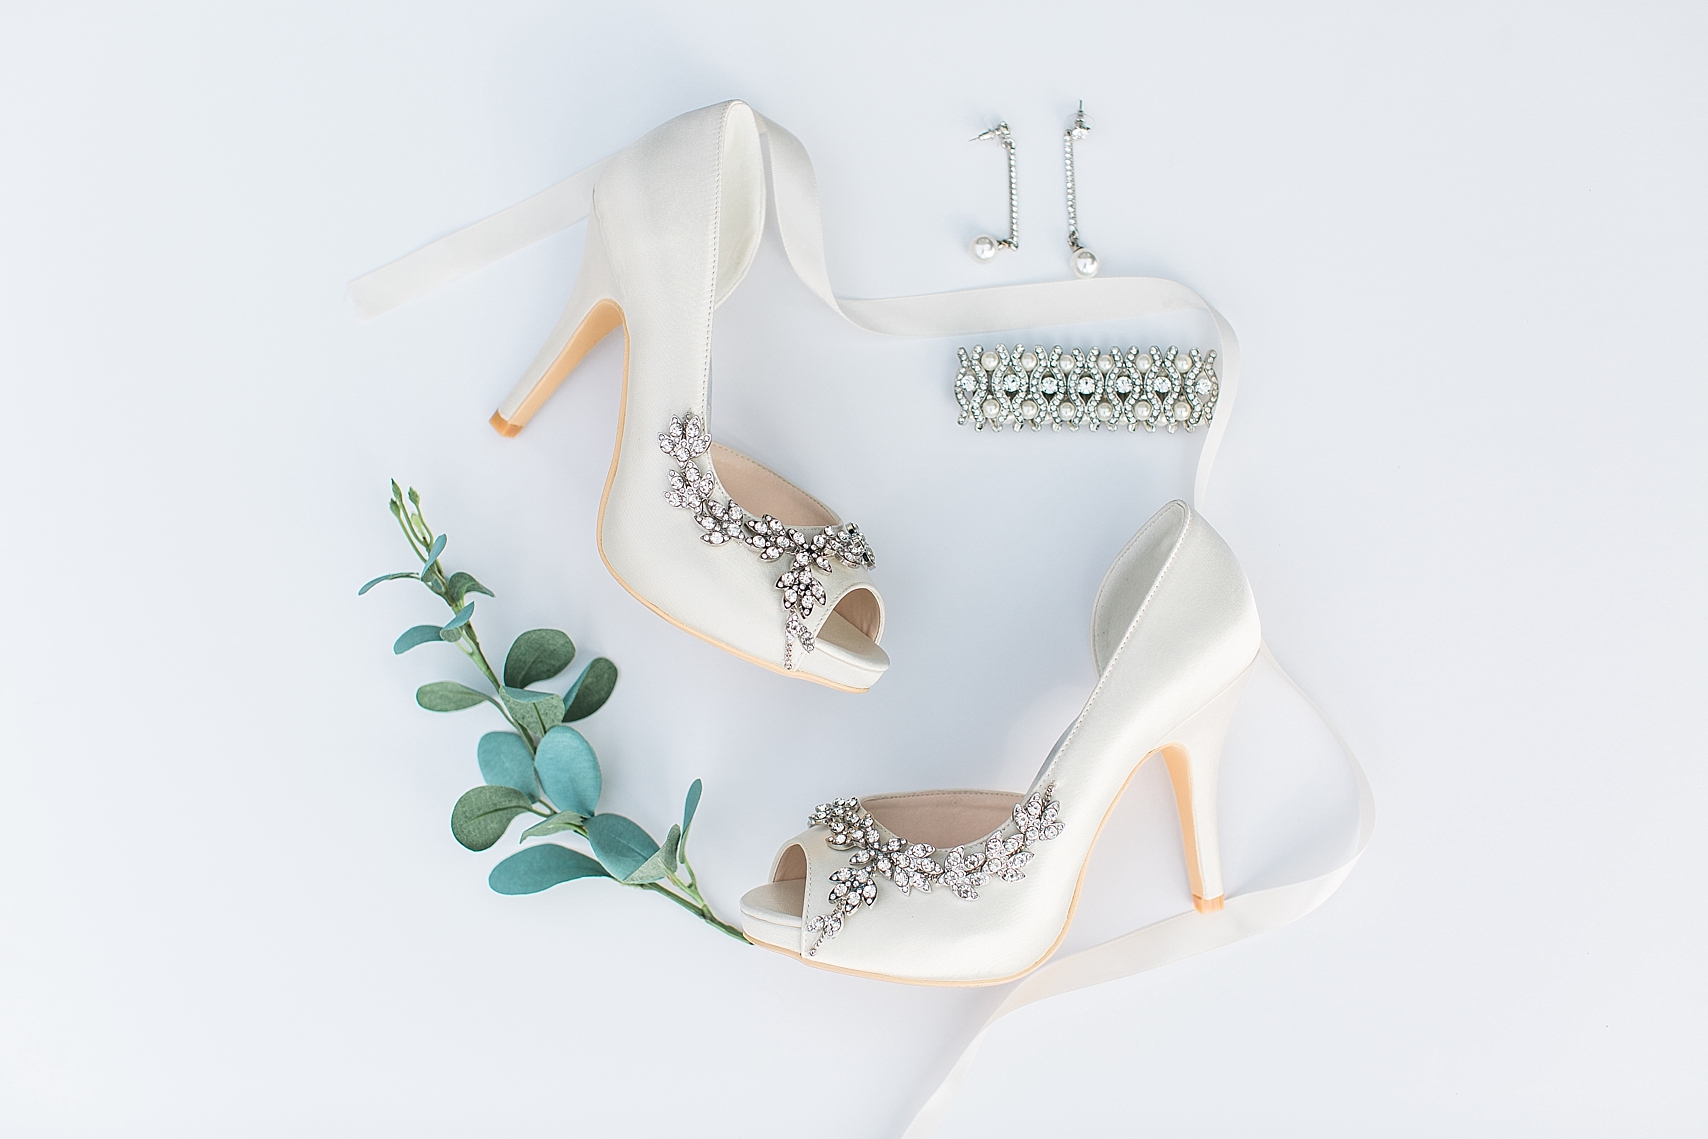 Bridal shoes and jewelry for wedding at the Chart House Summer Wedding Lakeville Minnesota Minneapolis Wedding Photographer Mallory Kiesow